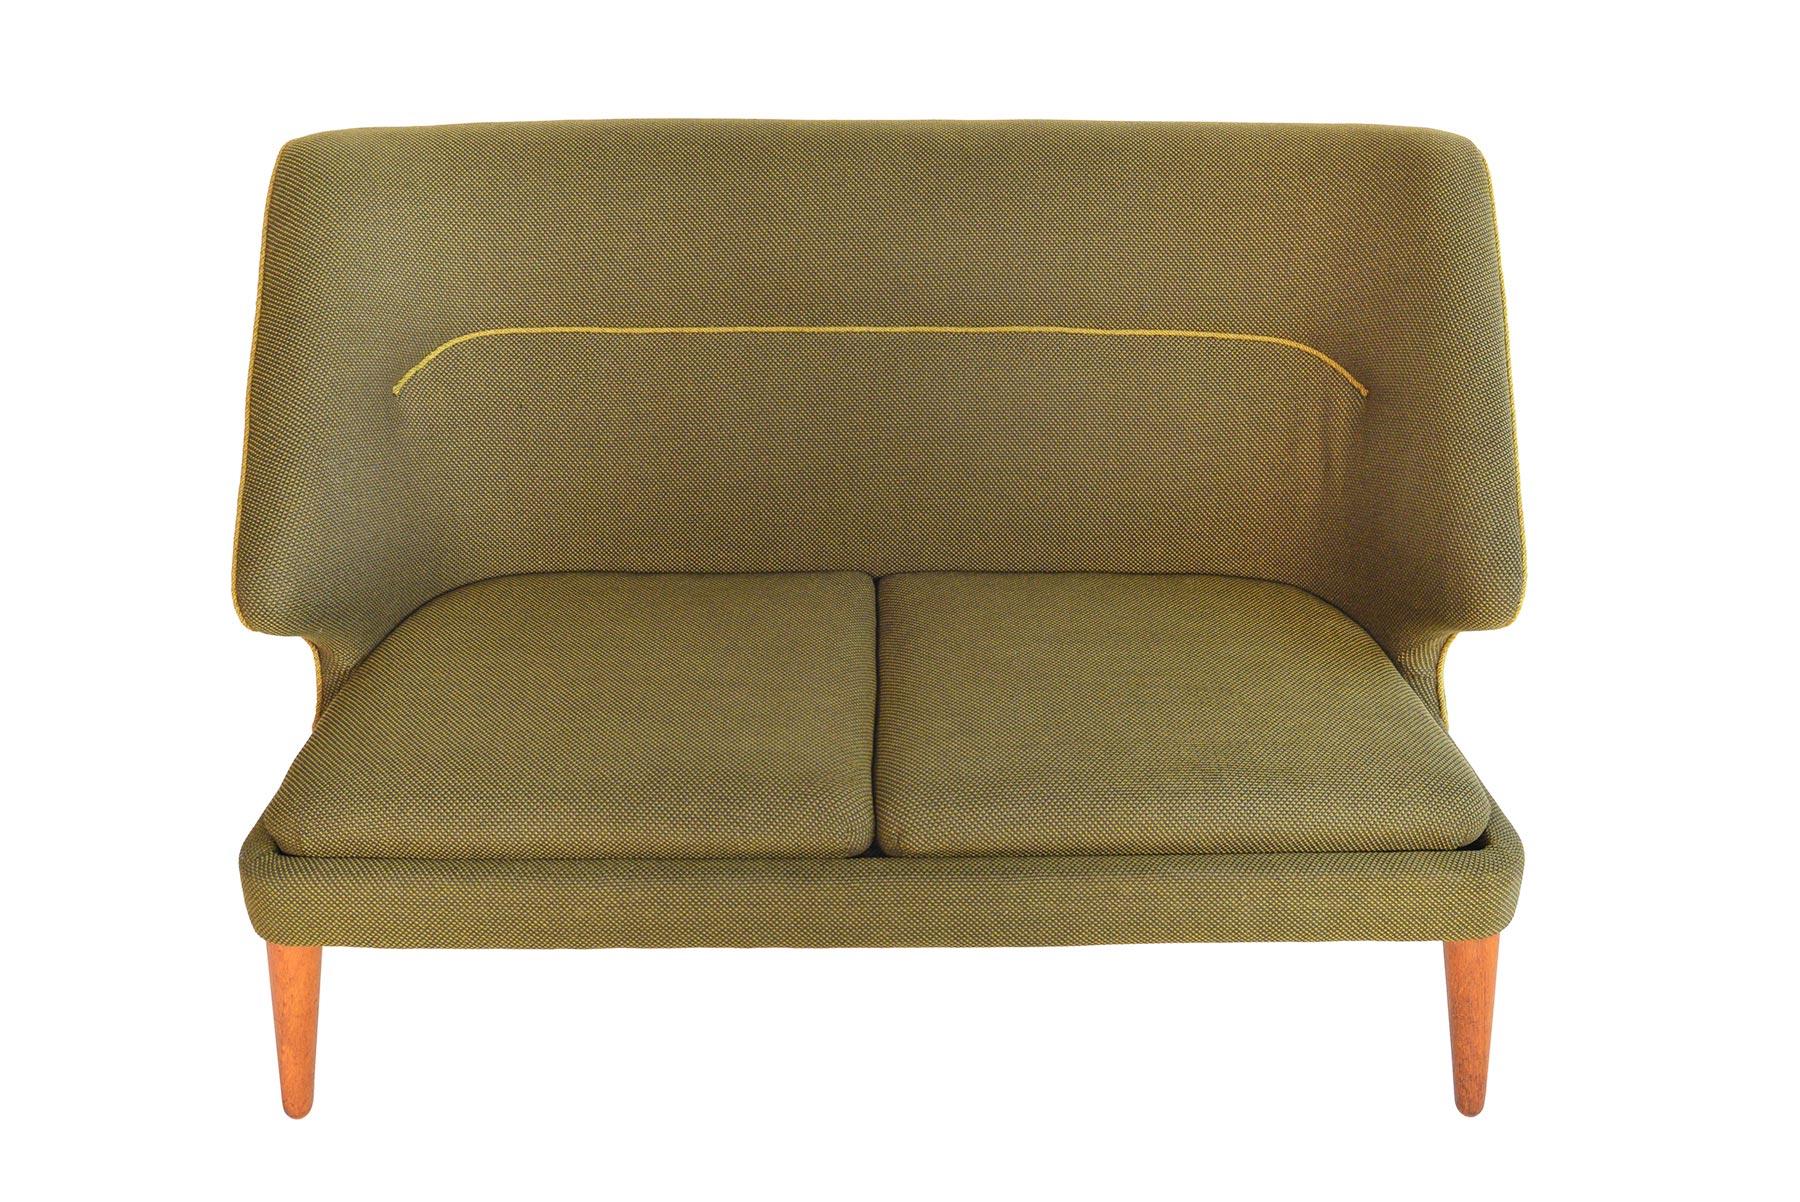 This rare Danish modern loveseat was designed by Arne Wahl Iversen as the ‘Flamingo’ sofa, Model 15, for Hans Hansen in 1955. Beautifully preserved and completely original, this cozy loveseat offers a tall back and dramatic profile. Solid canted